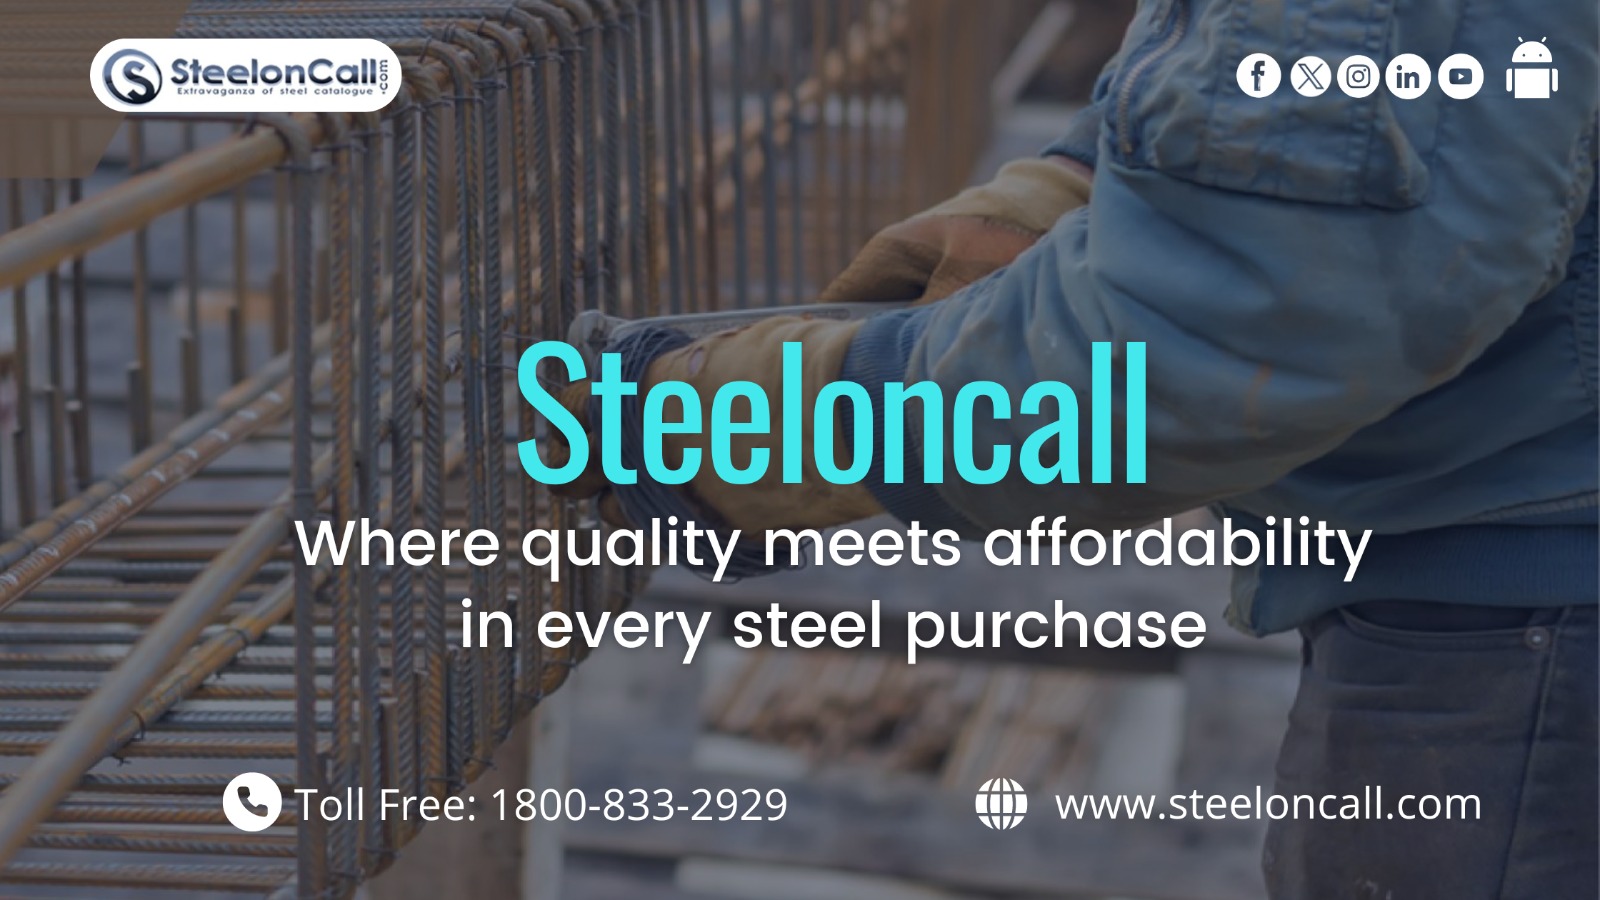 Steeloncall - Where quality meets affordability in every steel purchase.